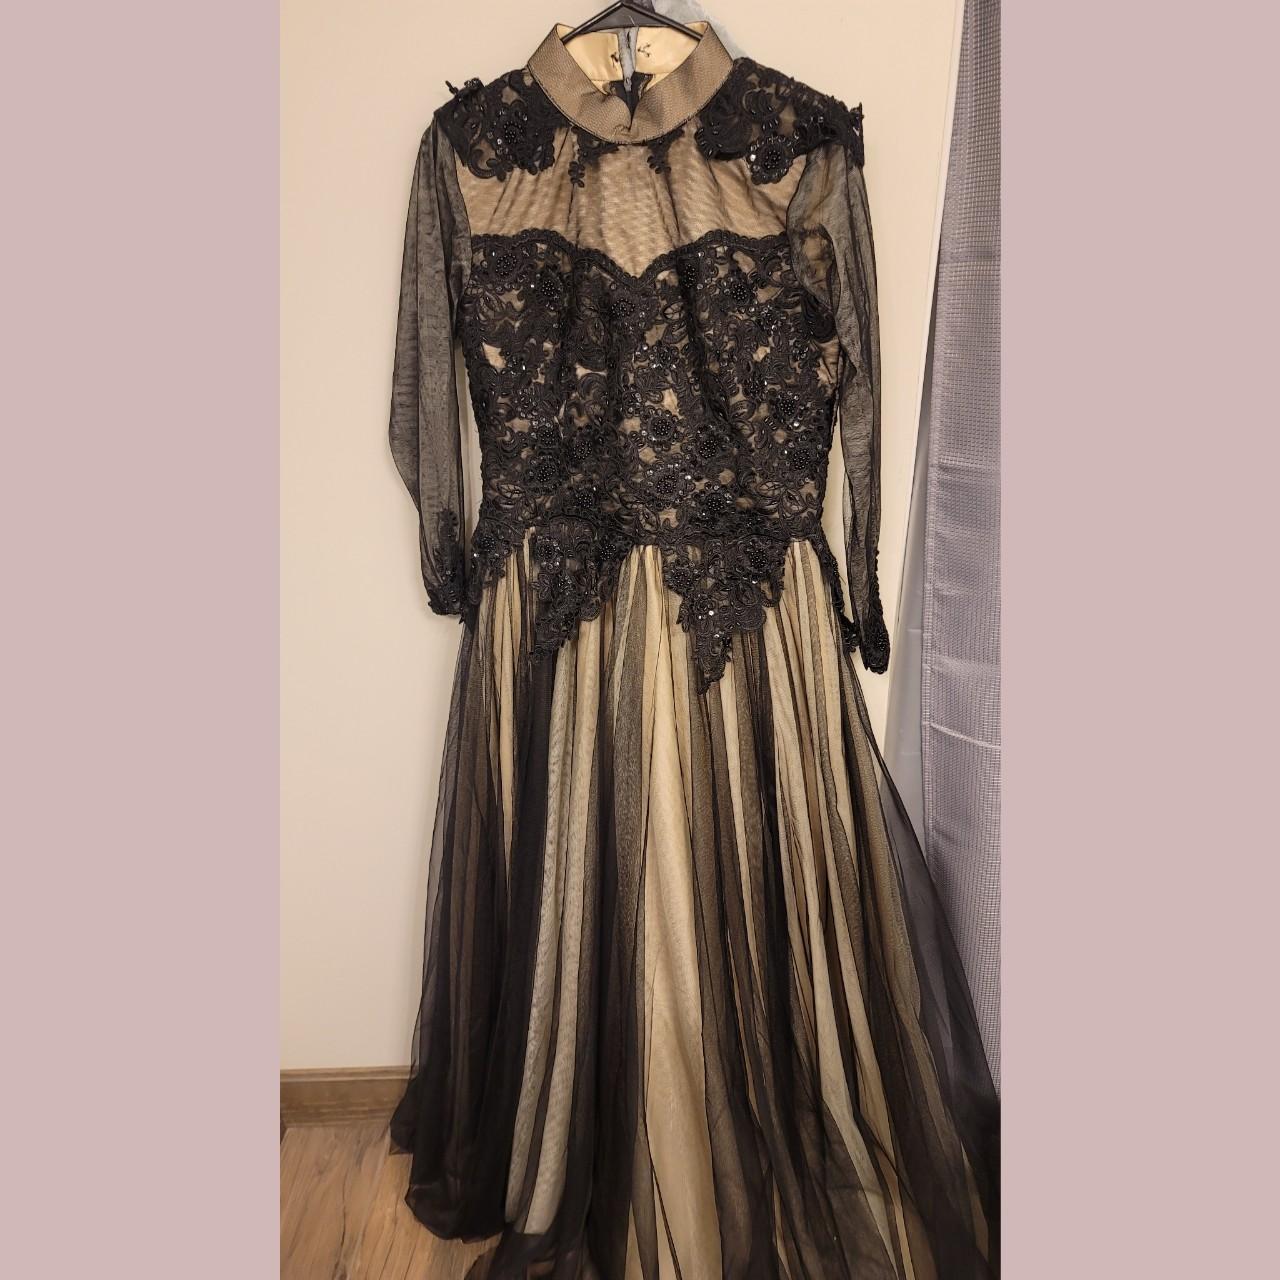 Retro prom dress . Black and beige lace with long... - Depop